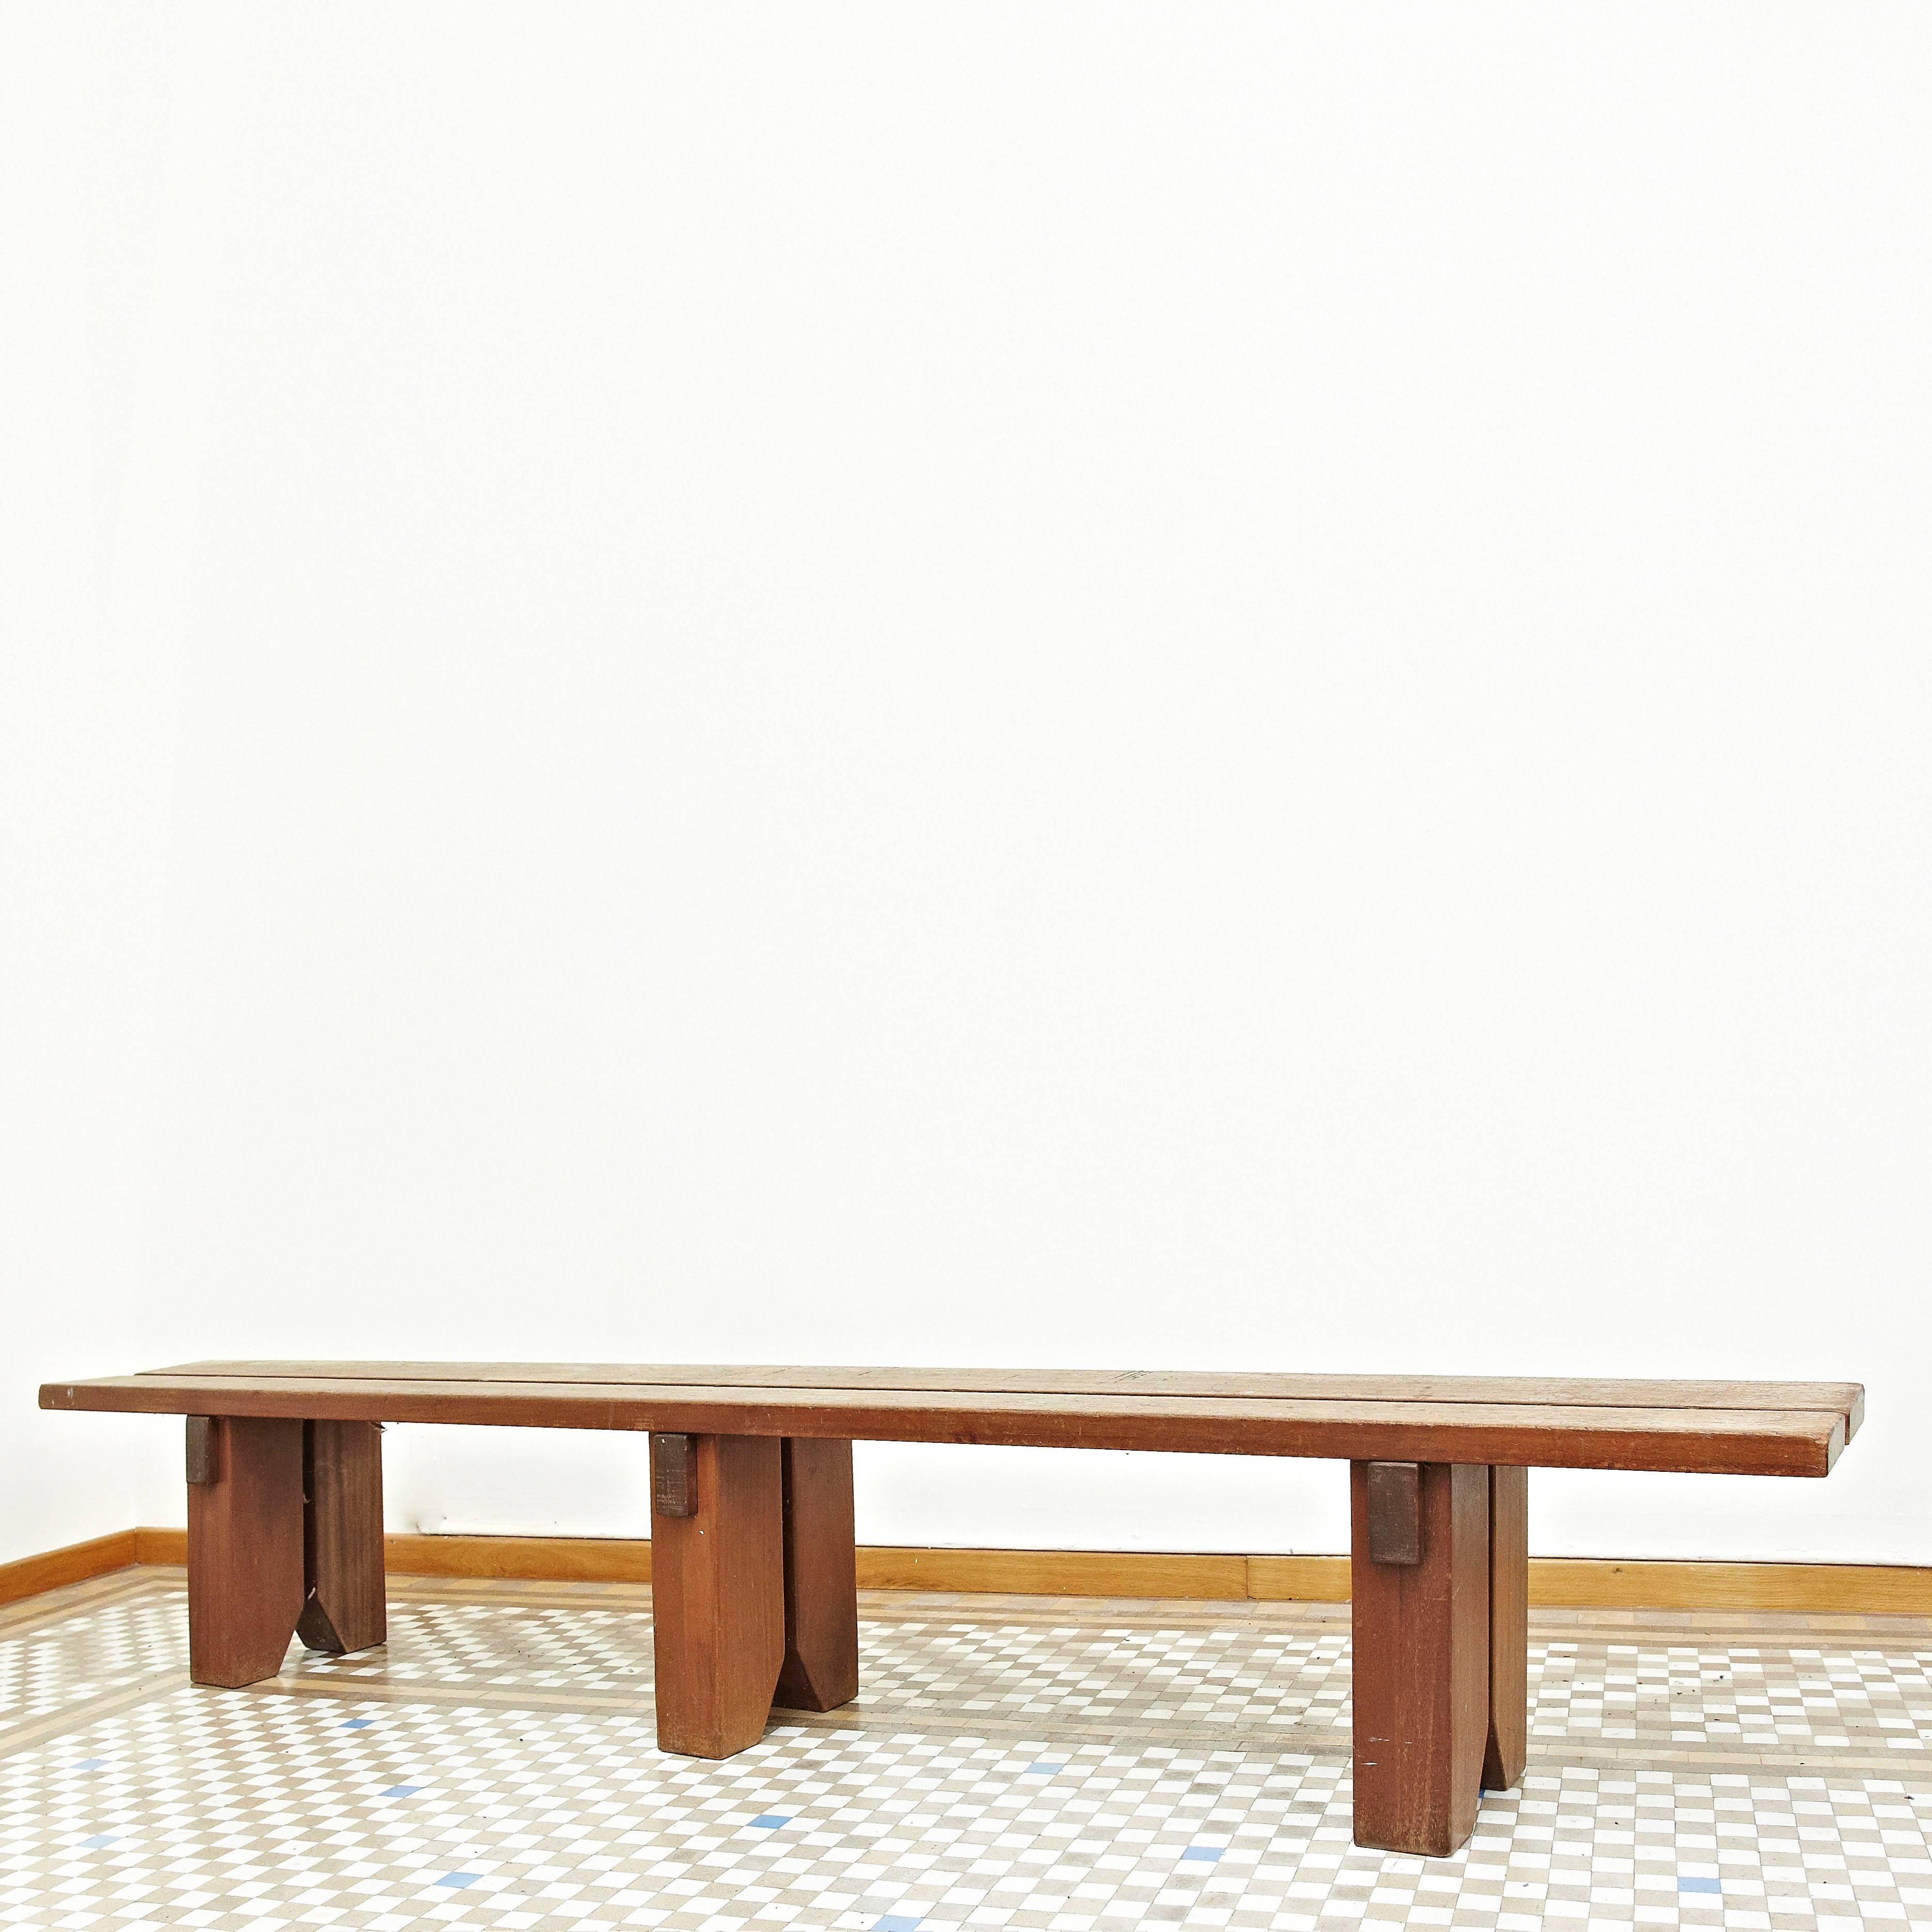 Bench designed by Charlotte Perriand, circa 1970.
Manufactured in France.
Mahogany wood.

In good original condition, with minor wear consistent with age and use, preserving a beautiful patina.

Originally designed for Perriand's own apartment